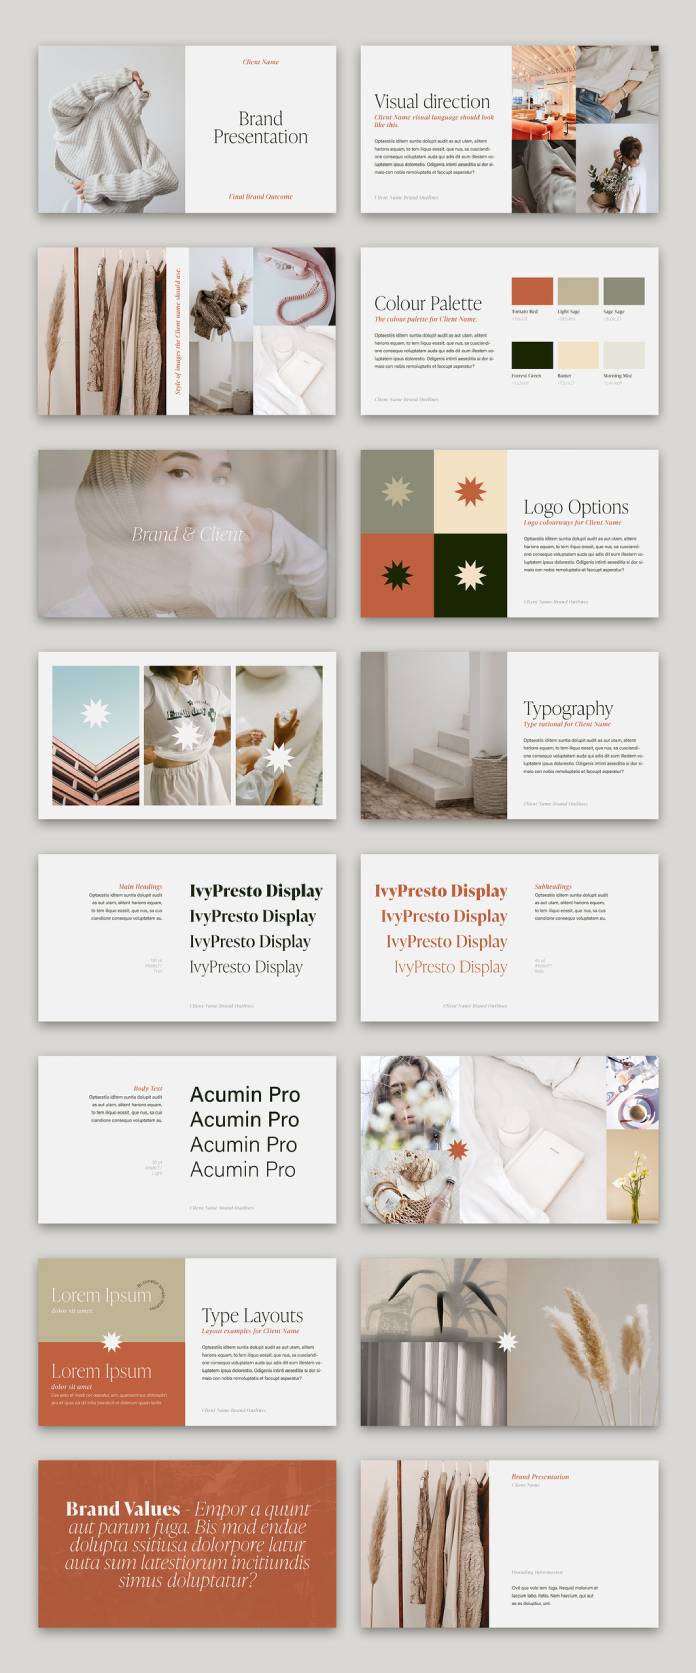 Simple Brand Guidelines Presentation Template for Adobe InDesign